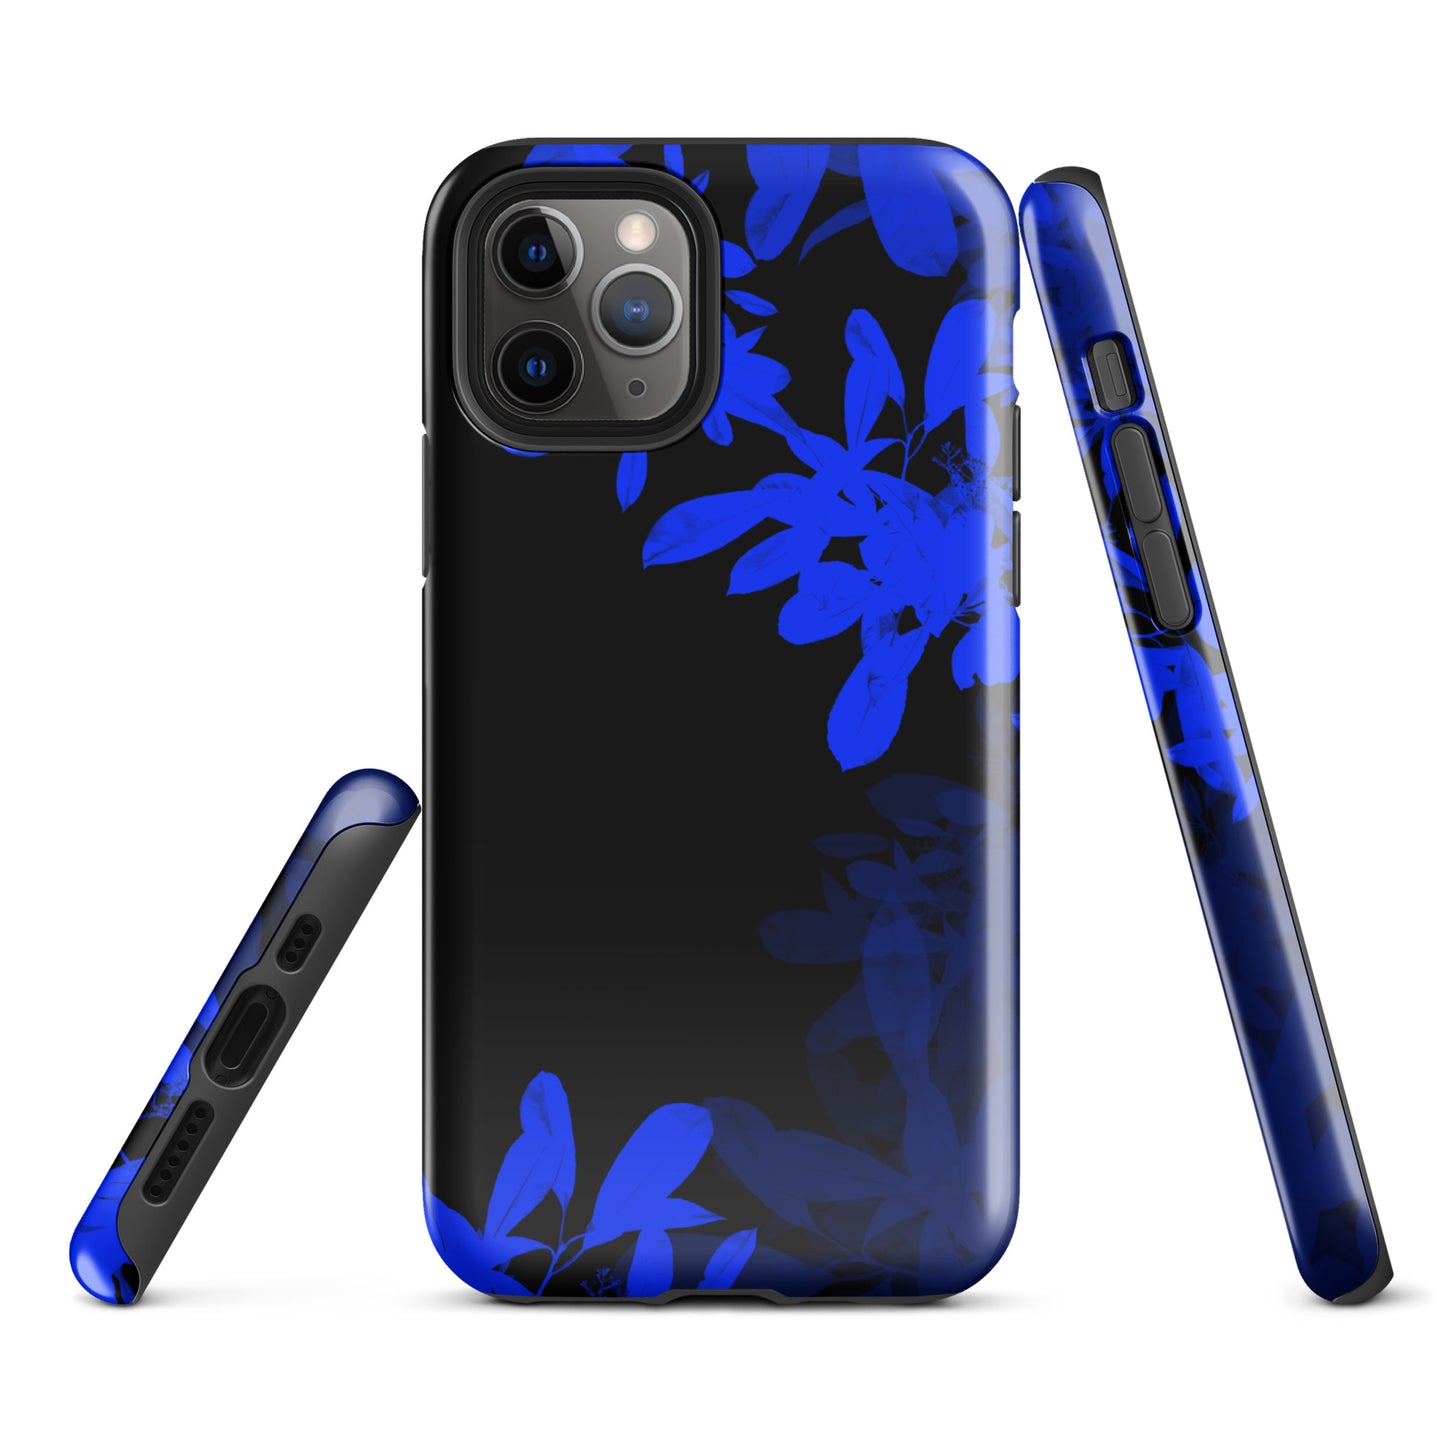 A Night Blue Plant Case for the iPhone 11 Pro 